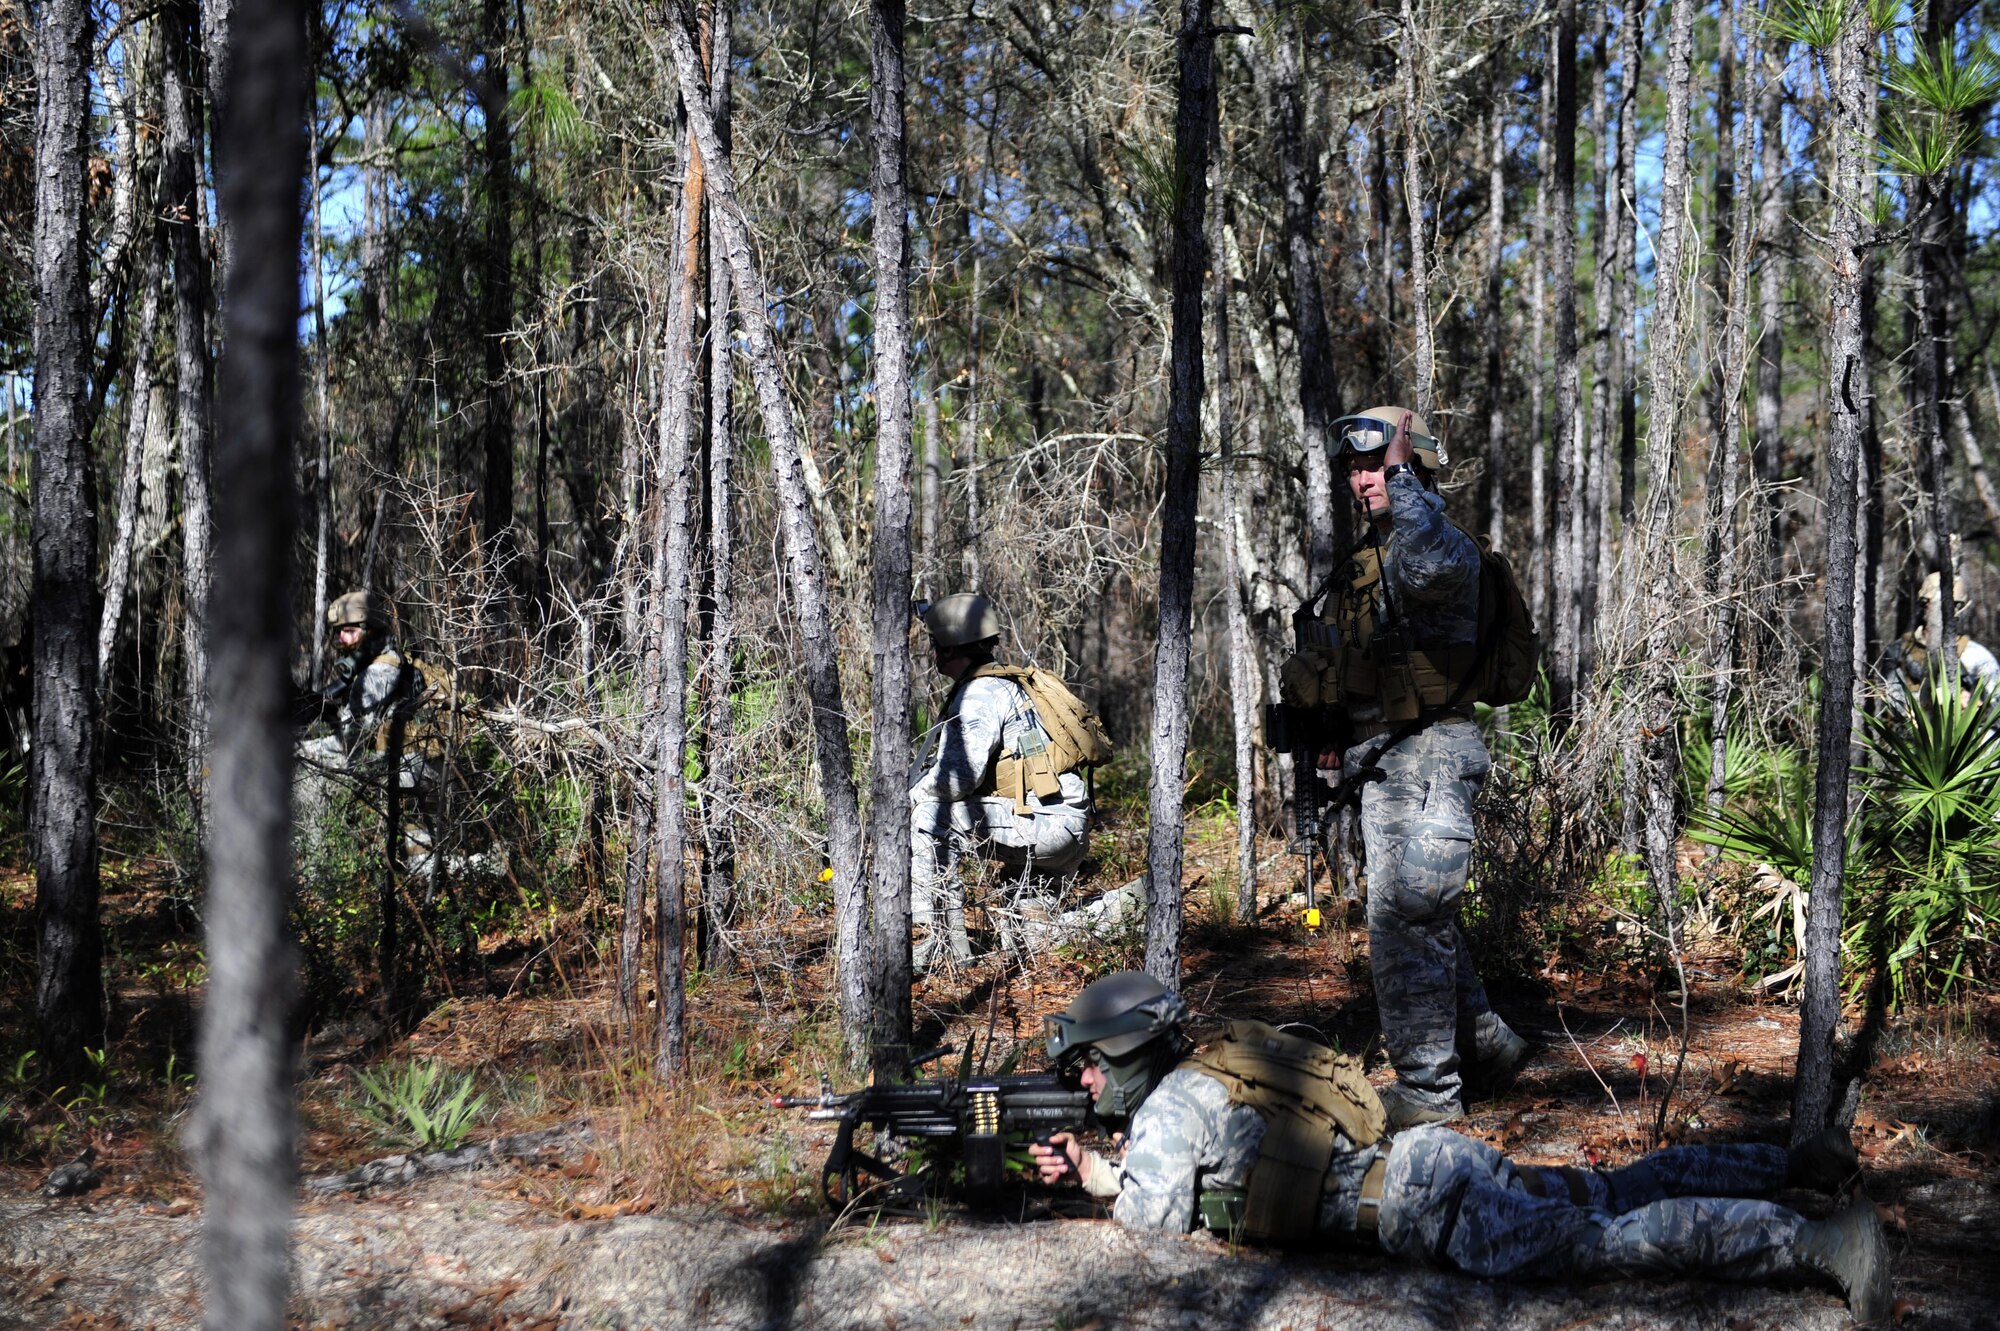 Members of the 1st Special Operations Security Forces Squadron provide cover during exercise Frigid Archer 2016 at Eglin Range, Fla., Jan. 10, 2016. Frigid Archer tested 1st Special Operations Wing Air Commandos’ expertise through a myriad of operational and support requirements. (U.S. Air Force photo by Staff Sgt. Tyler Placie)